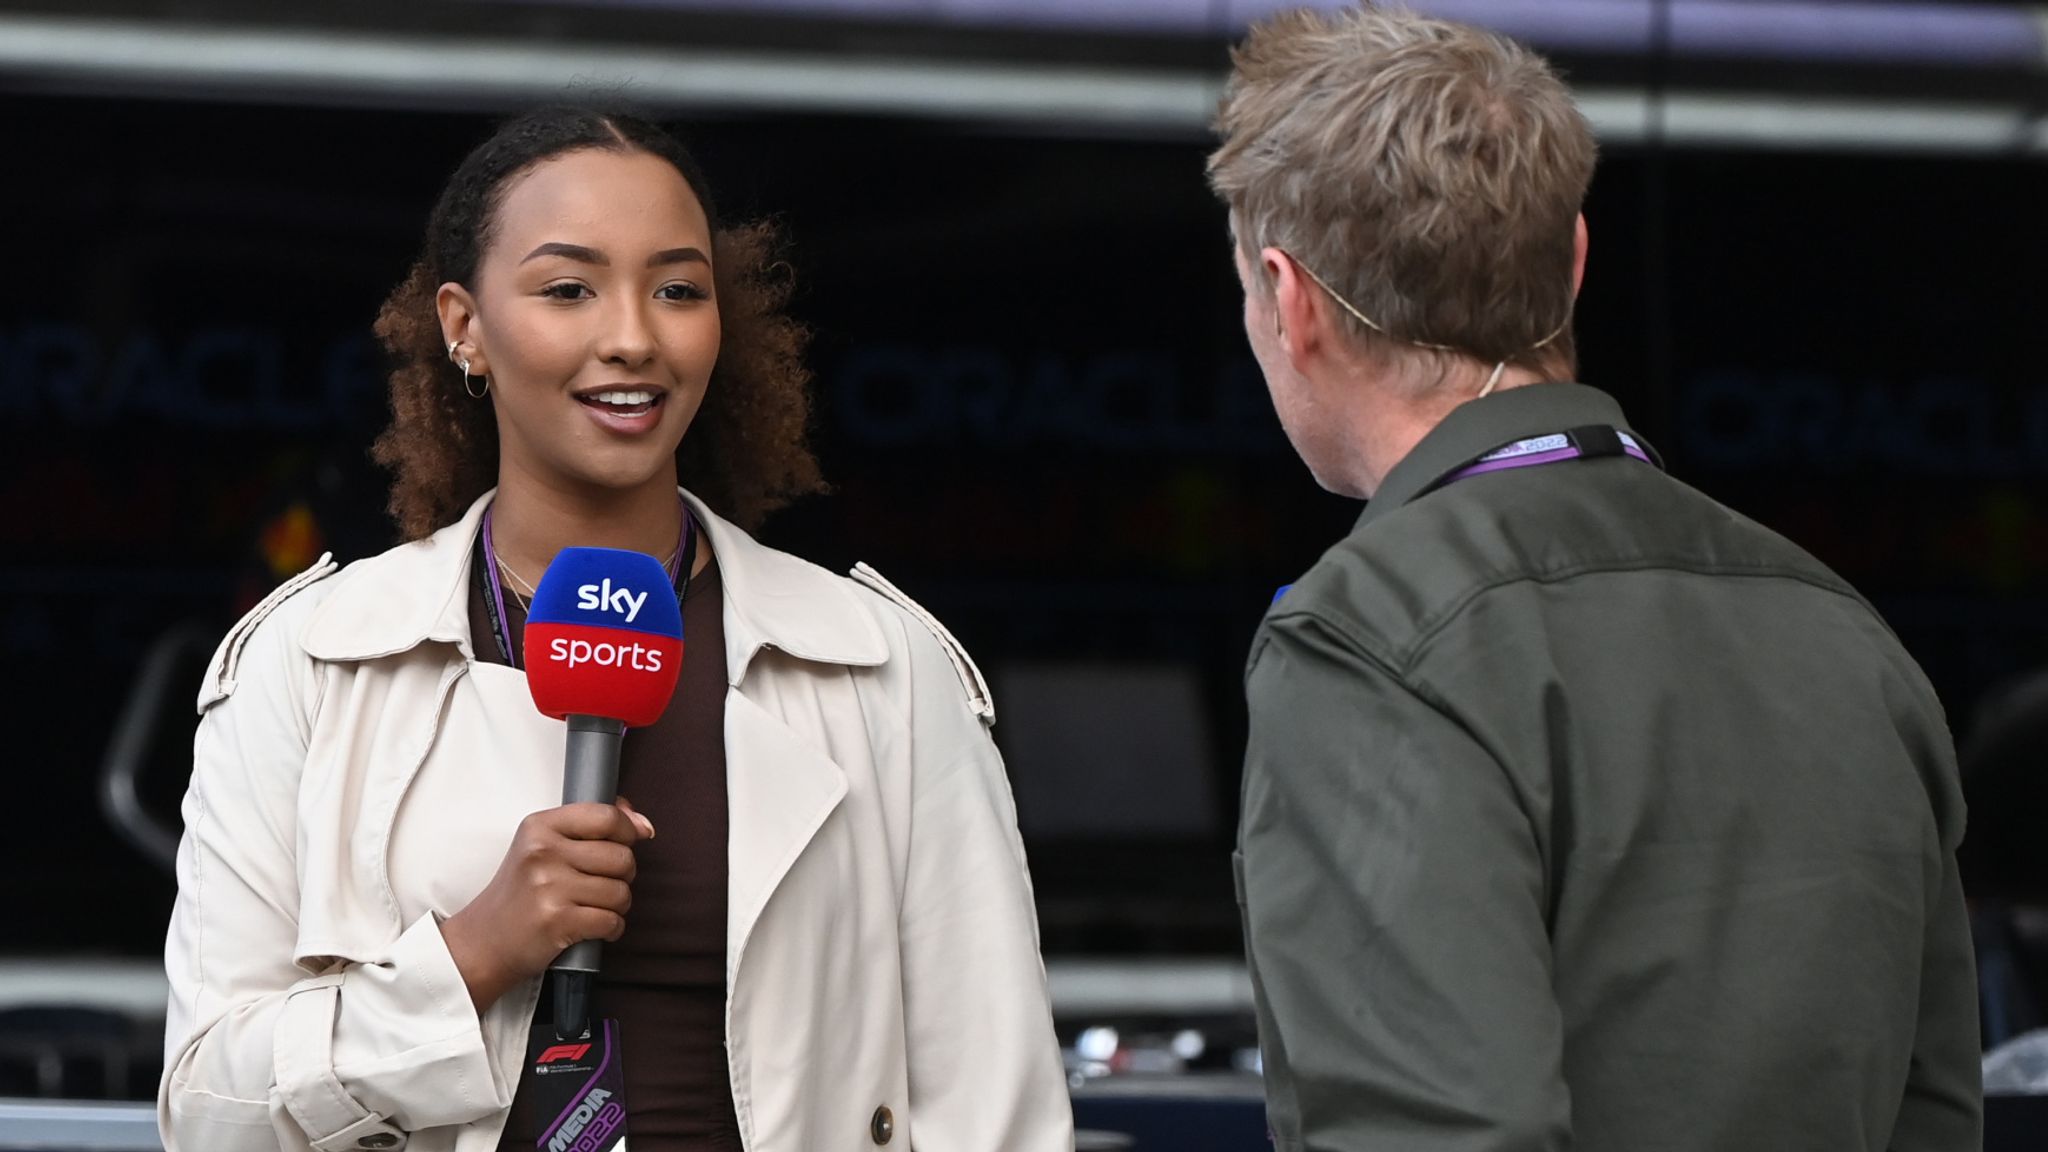 Lewis Hamilton says Sky Sports F1s Naomi Schiff is totally qualified after Twitter troll questions her credentials F1 News